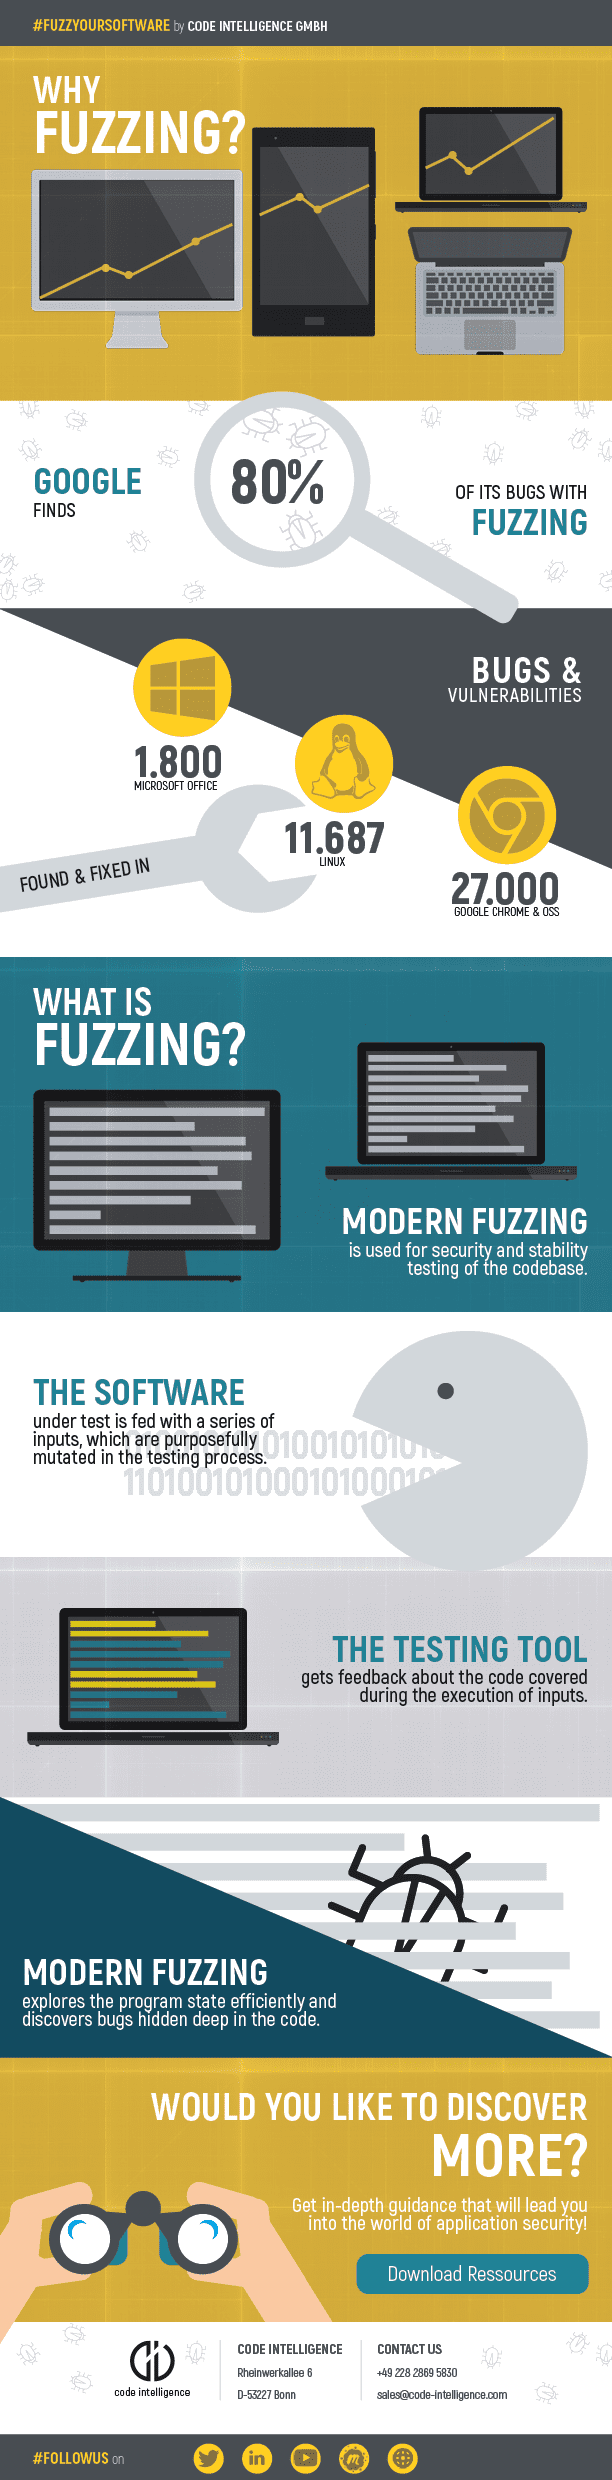 What is Fuzzing?